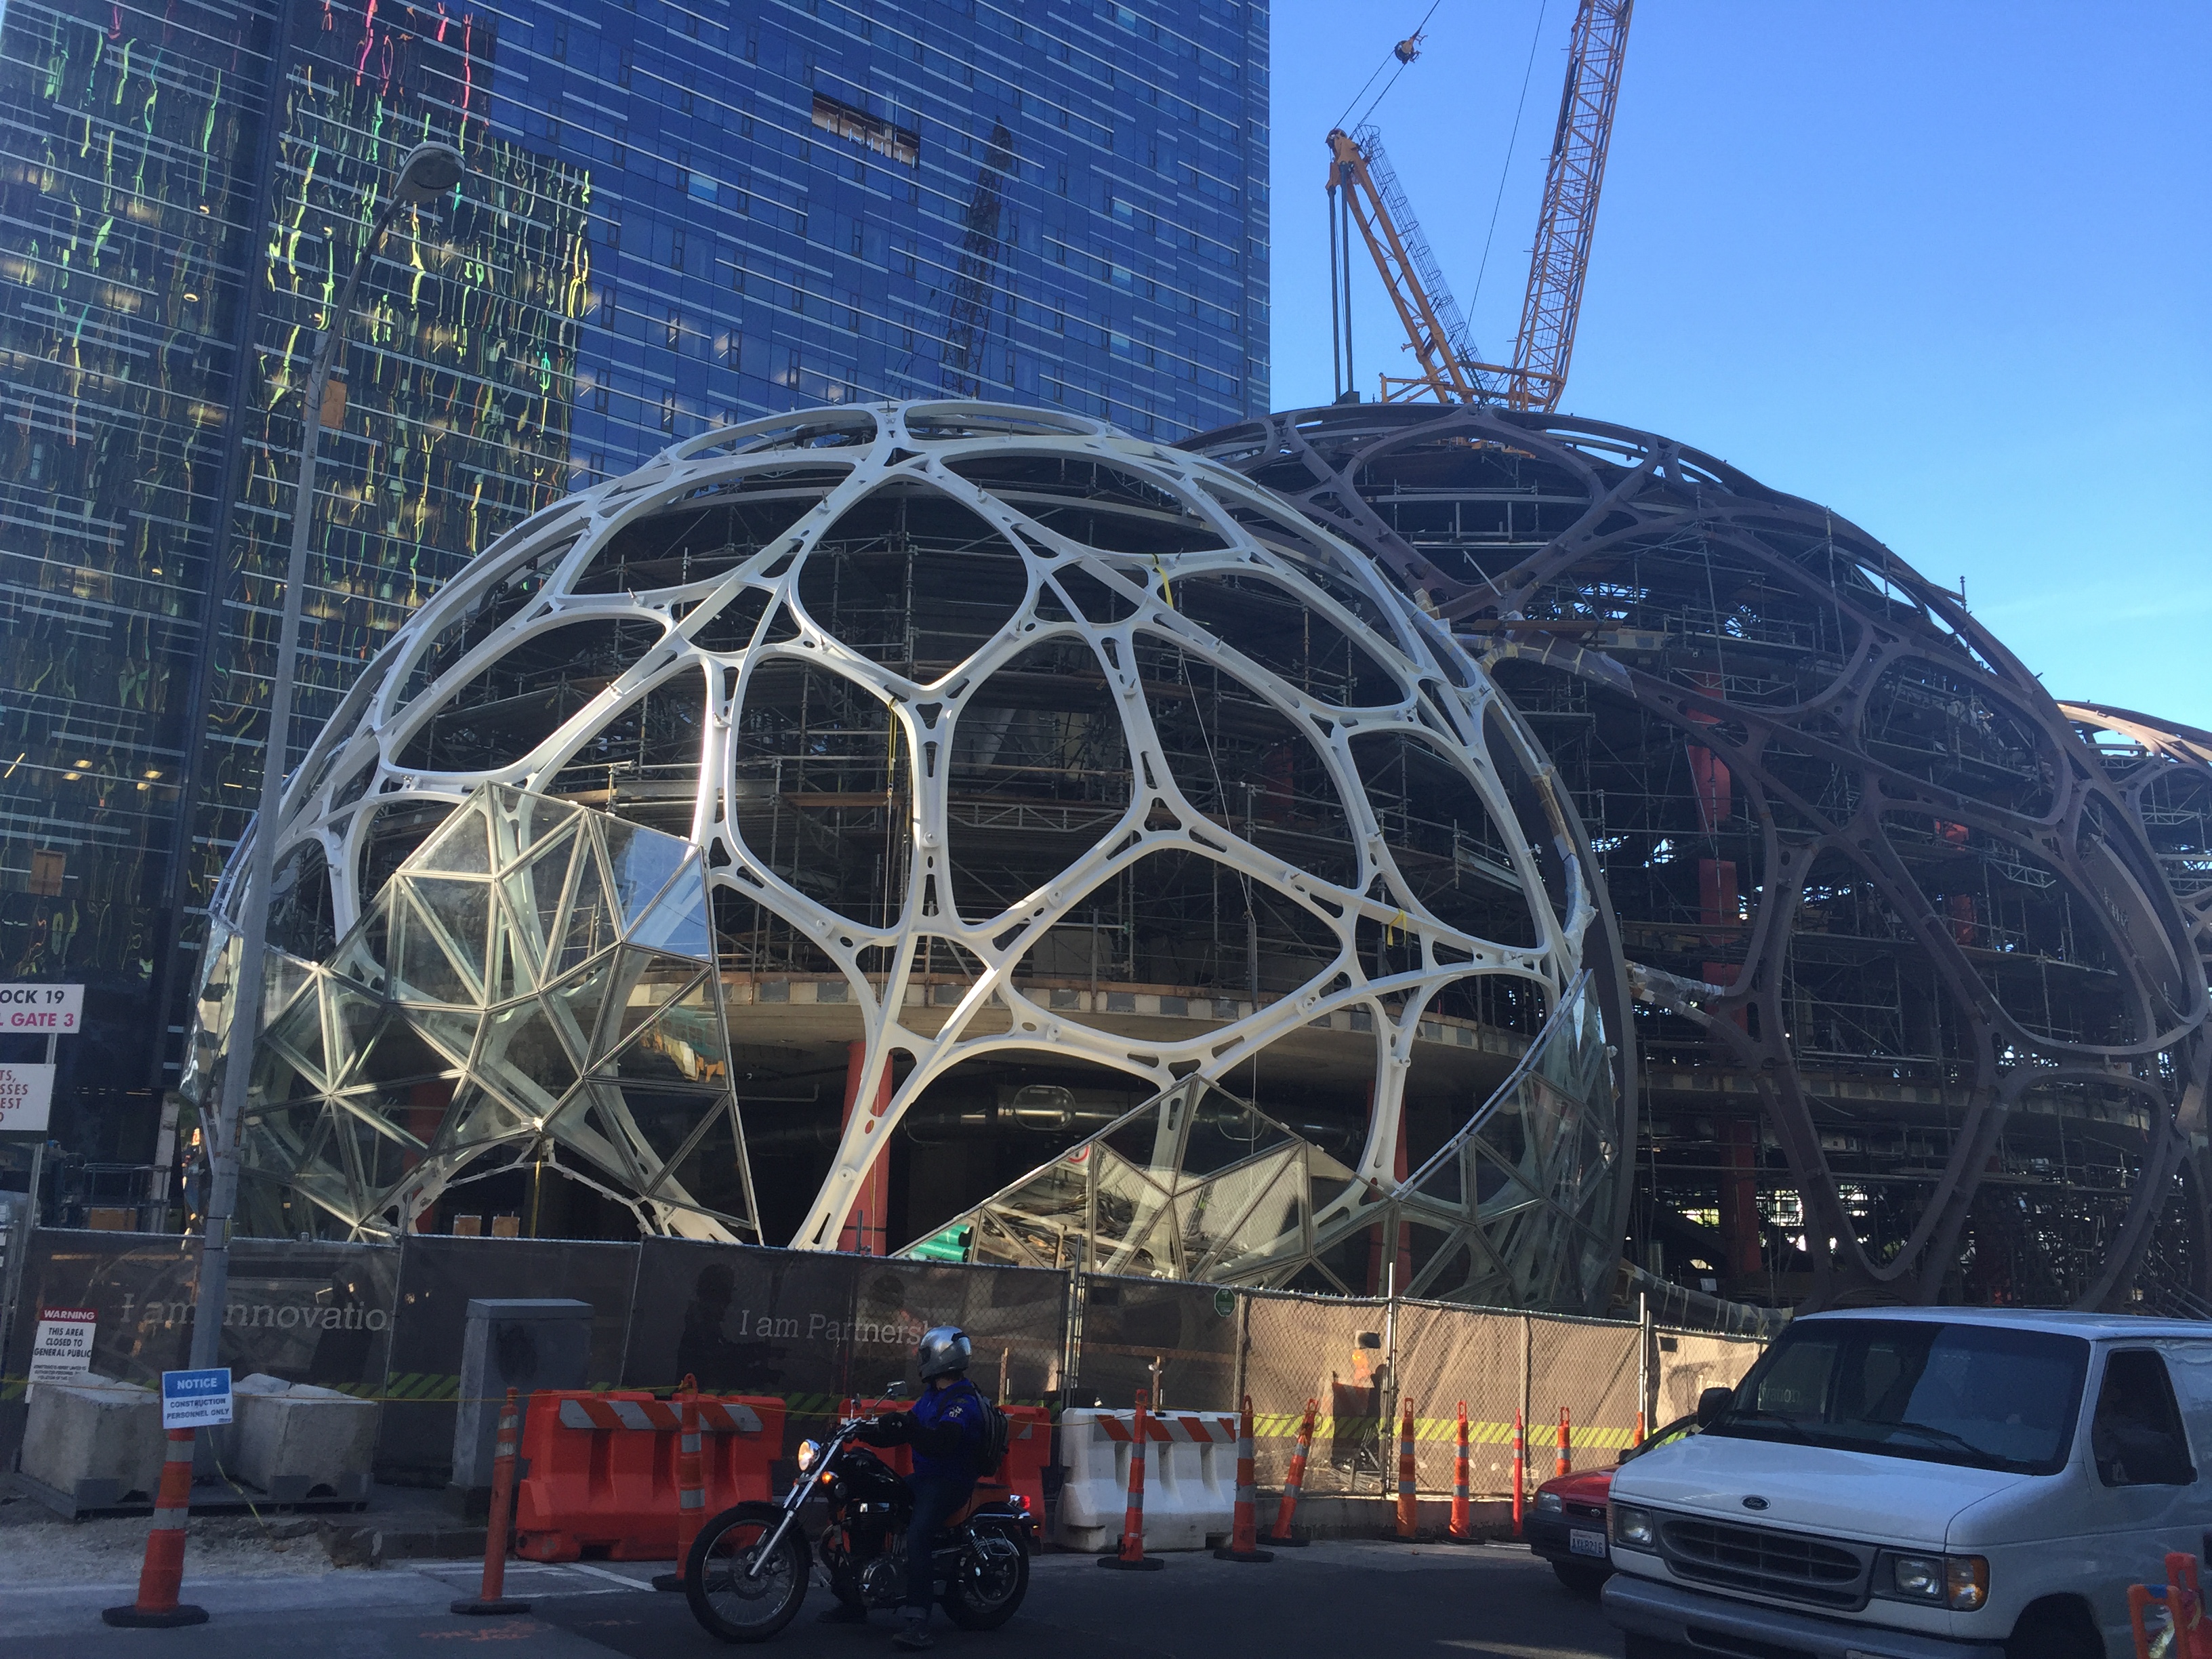 The orb-like structures under construction at Amazon's Rufus 2.0 site.